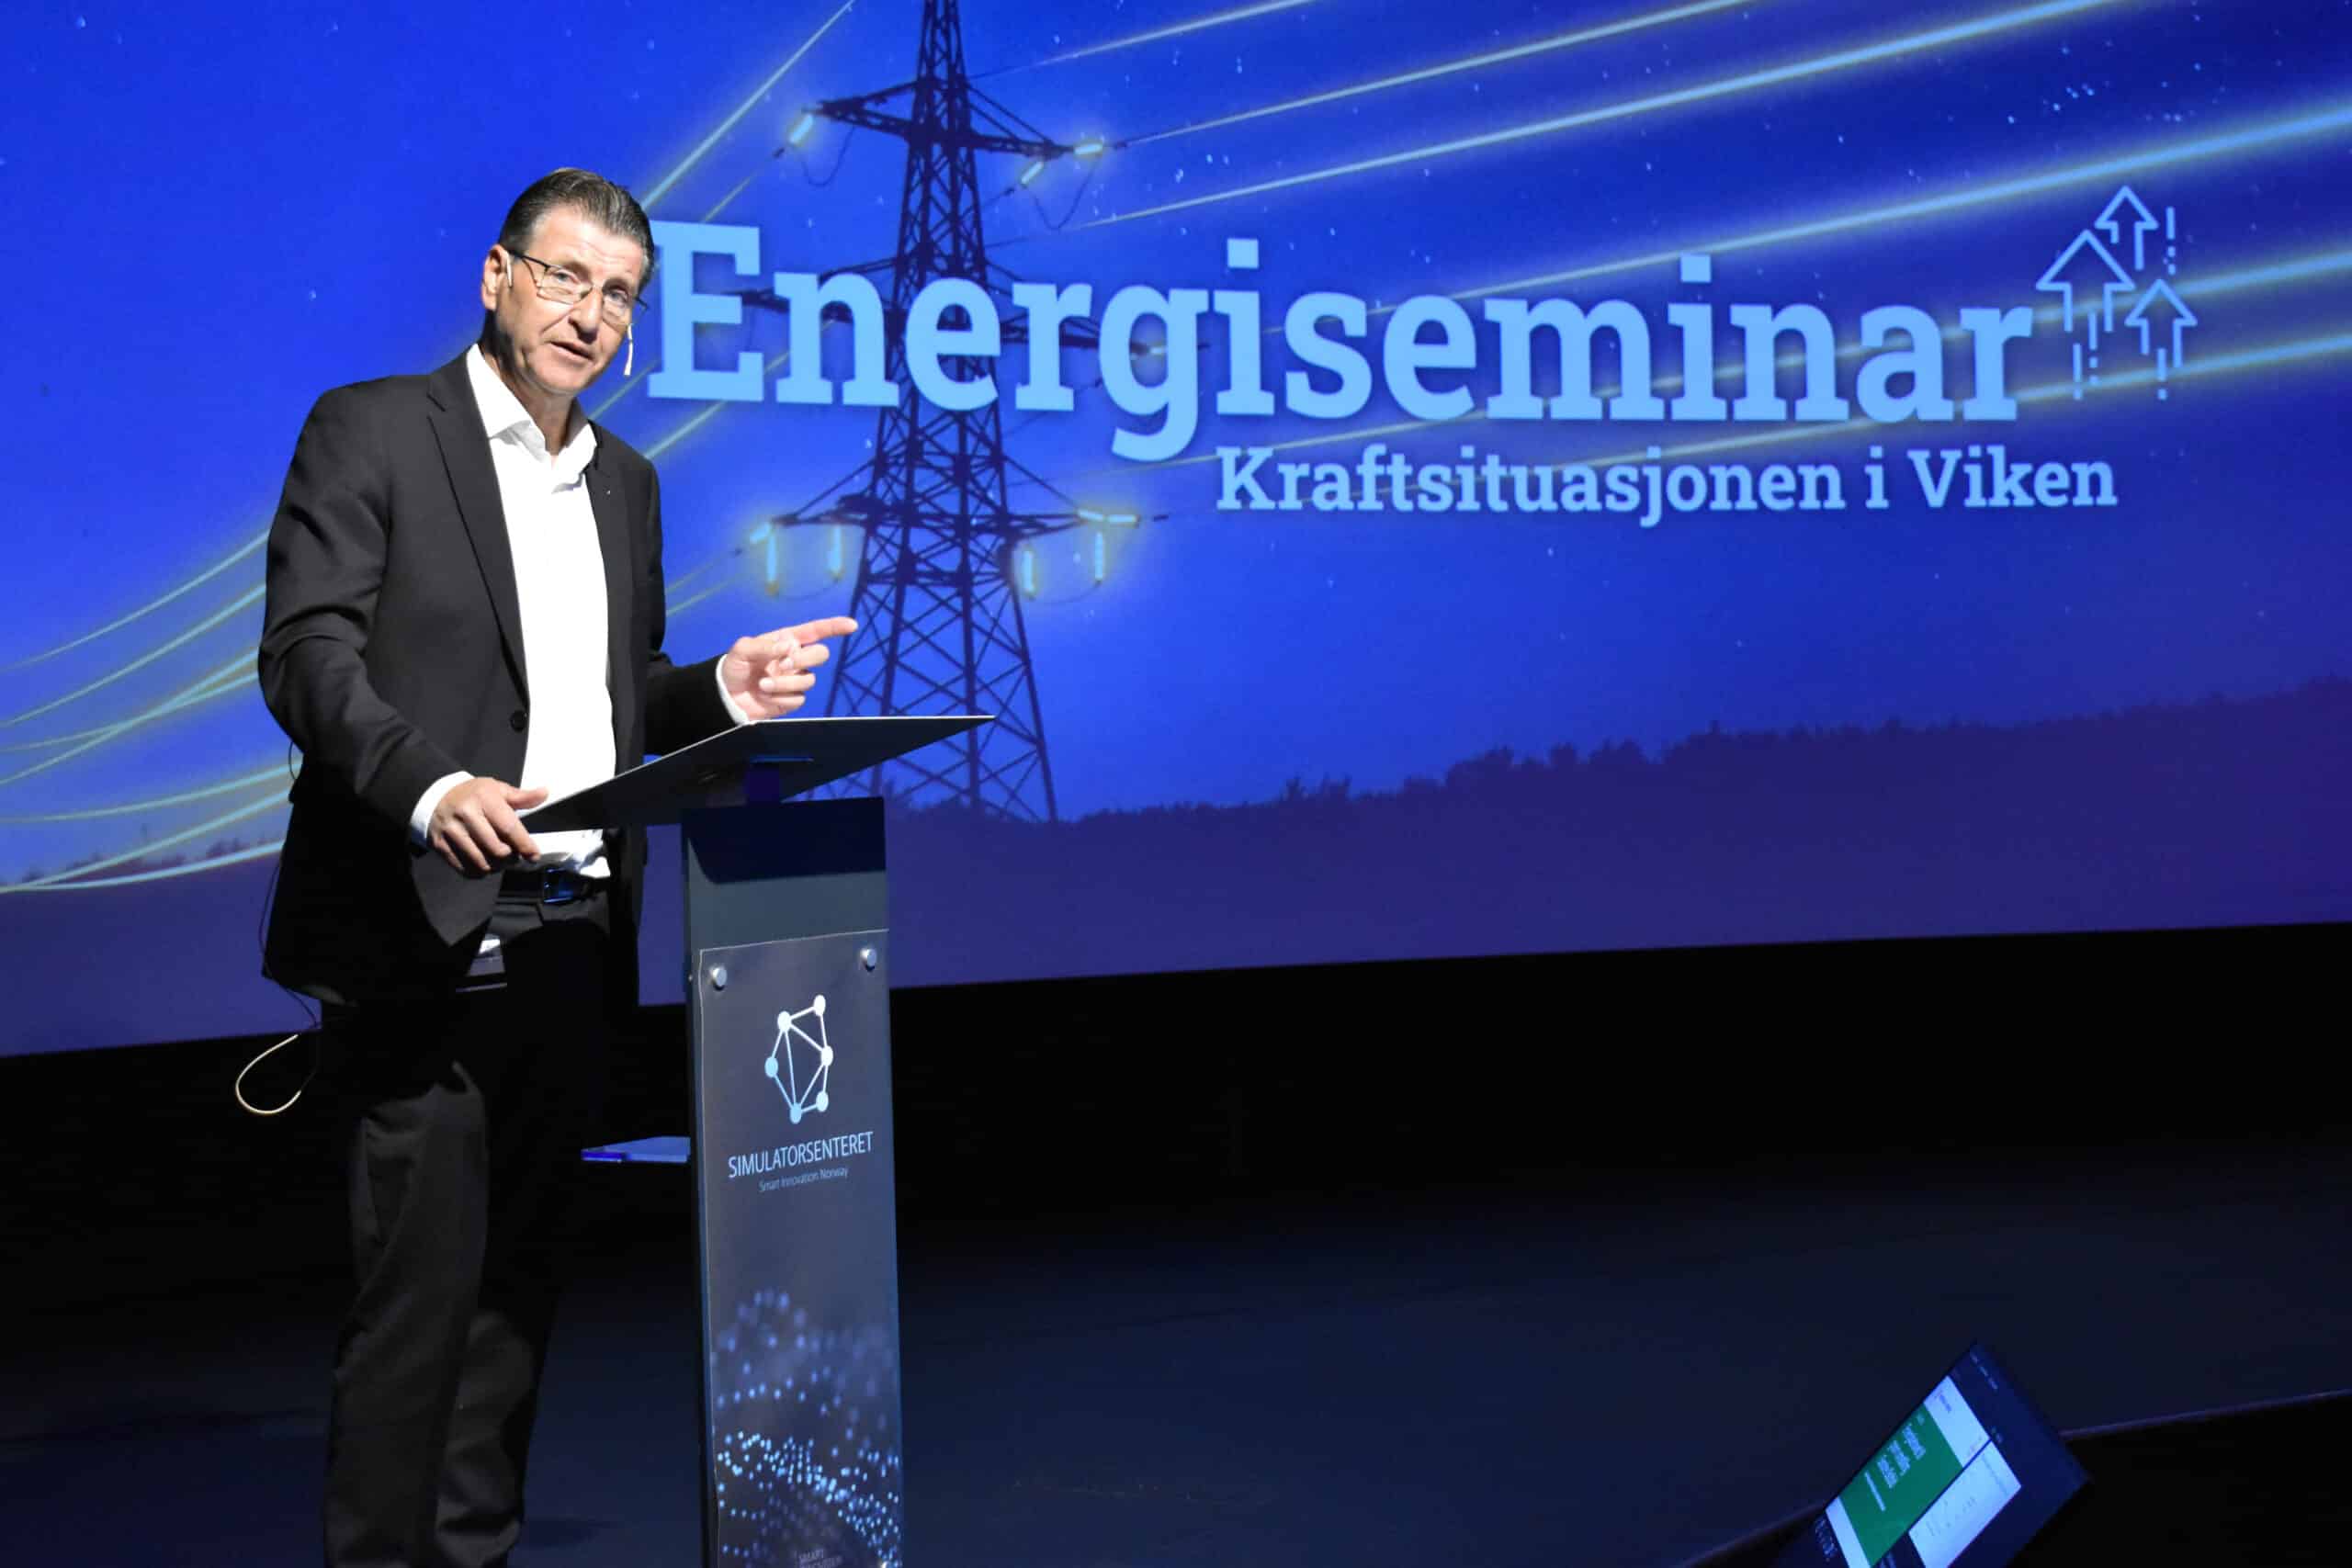 Stein Erik Lauvås, Ap, the Storting's energy and environment committee, stands on stage in the Smart Innovation Arena during the energy seminar on June 1, 2023.